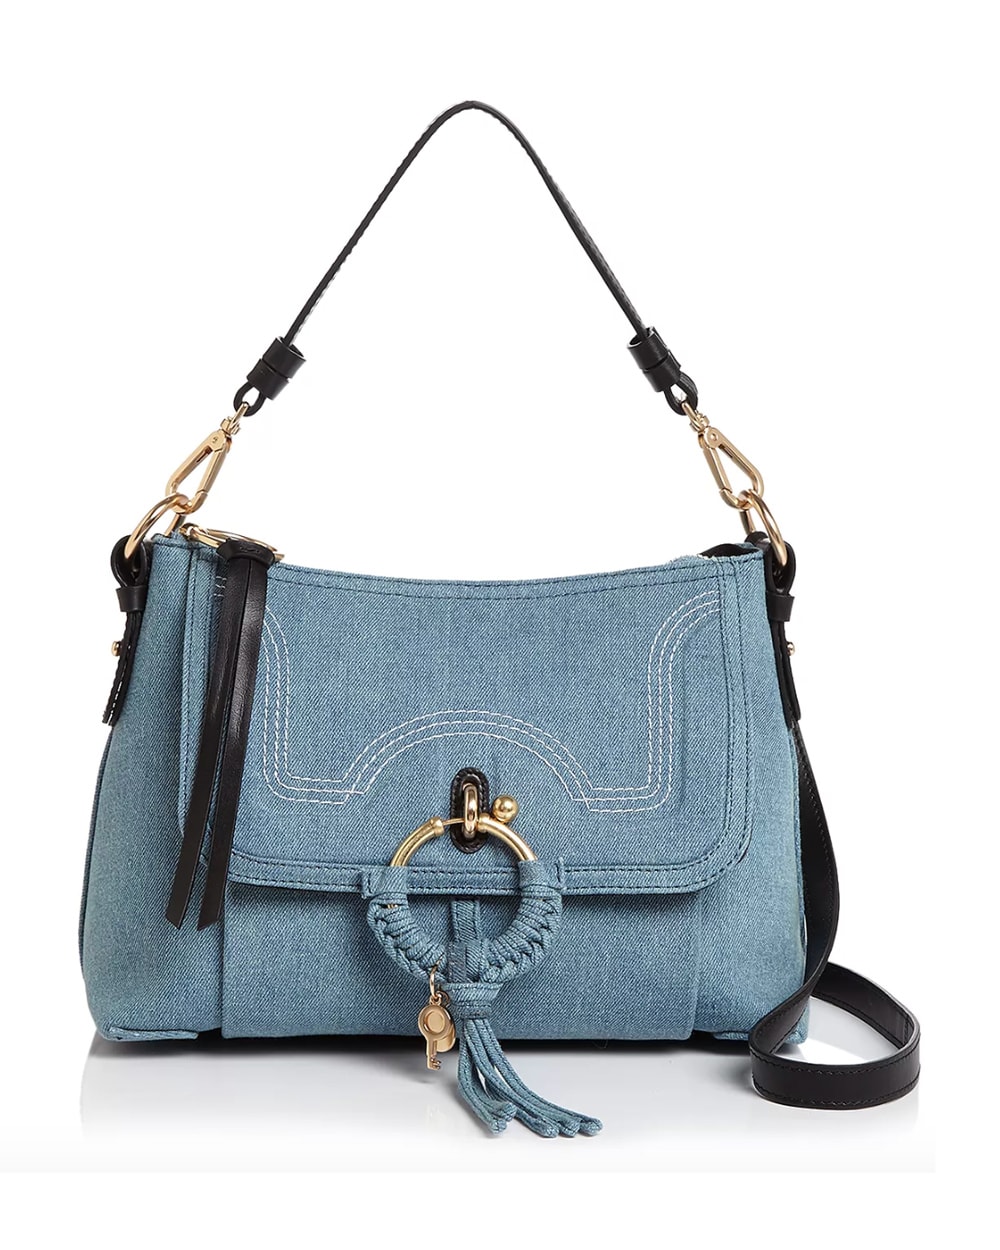 LOULou Designer Denim Gold Chain Shoulder Bag Fashionable Handbag Purse  With Flap, Crossbody Clutch, And Wallet In Goldk From Amazing889, $72.54 |  DHgate.Com